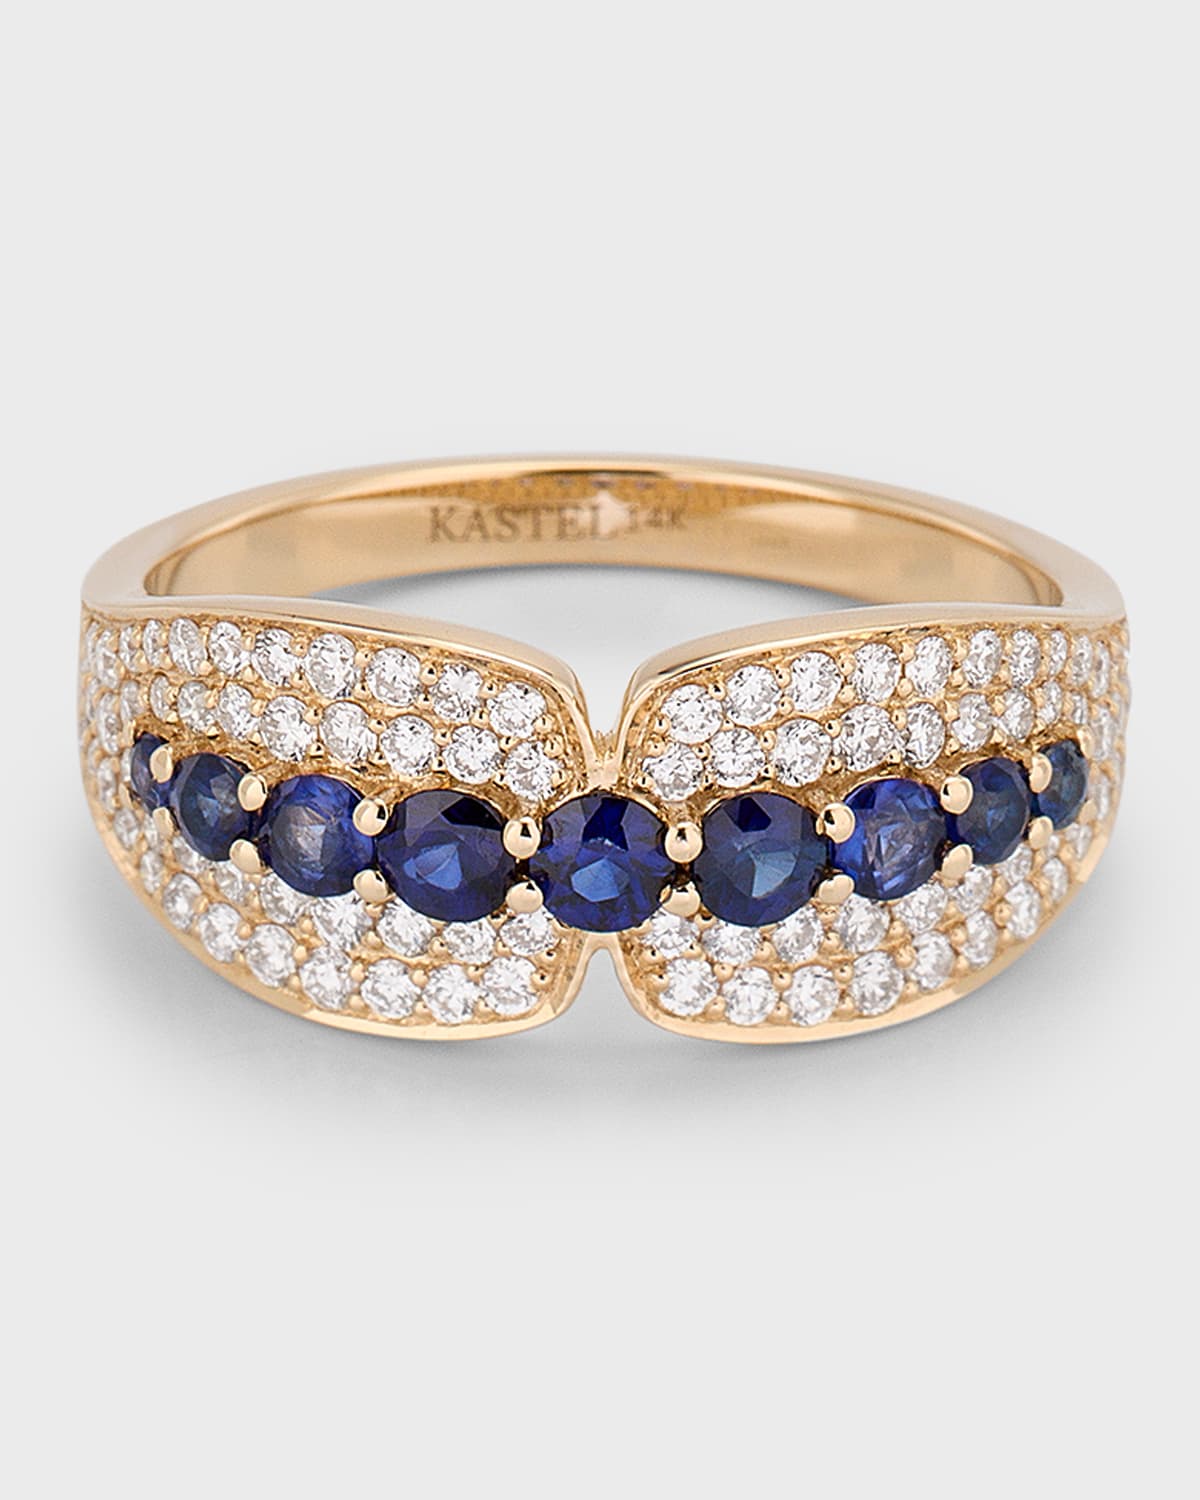 14K Albi Blue Sapphire and Diamond Band Ring, Size 7